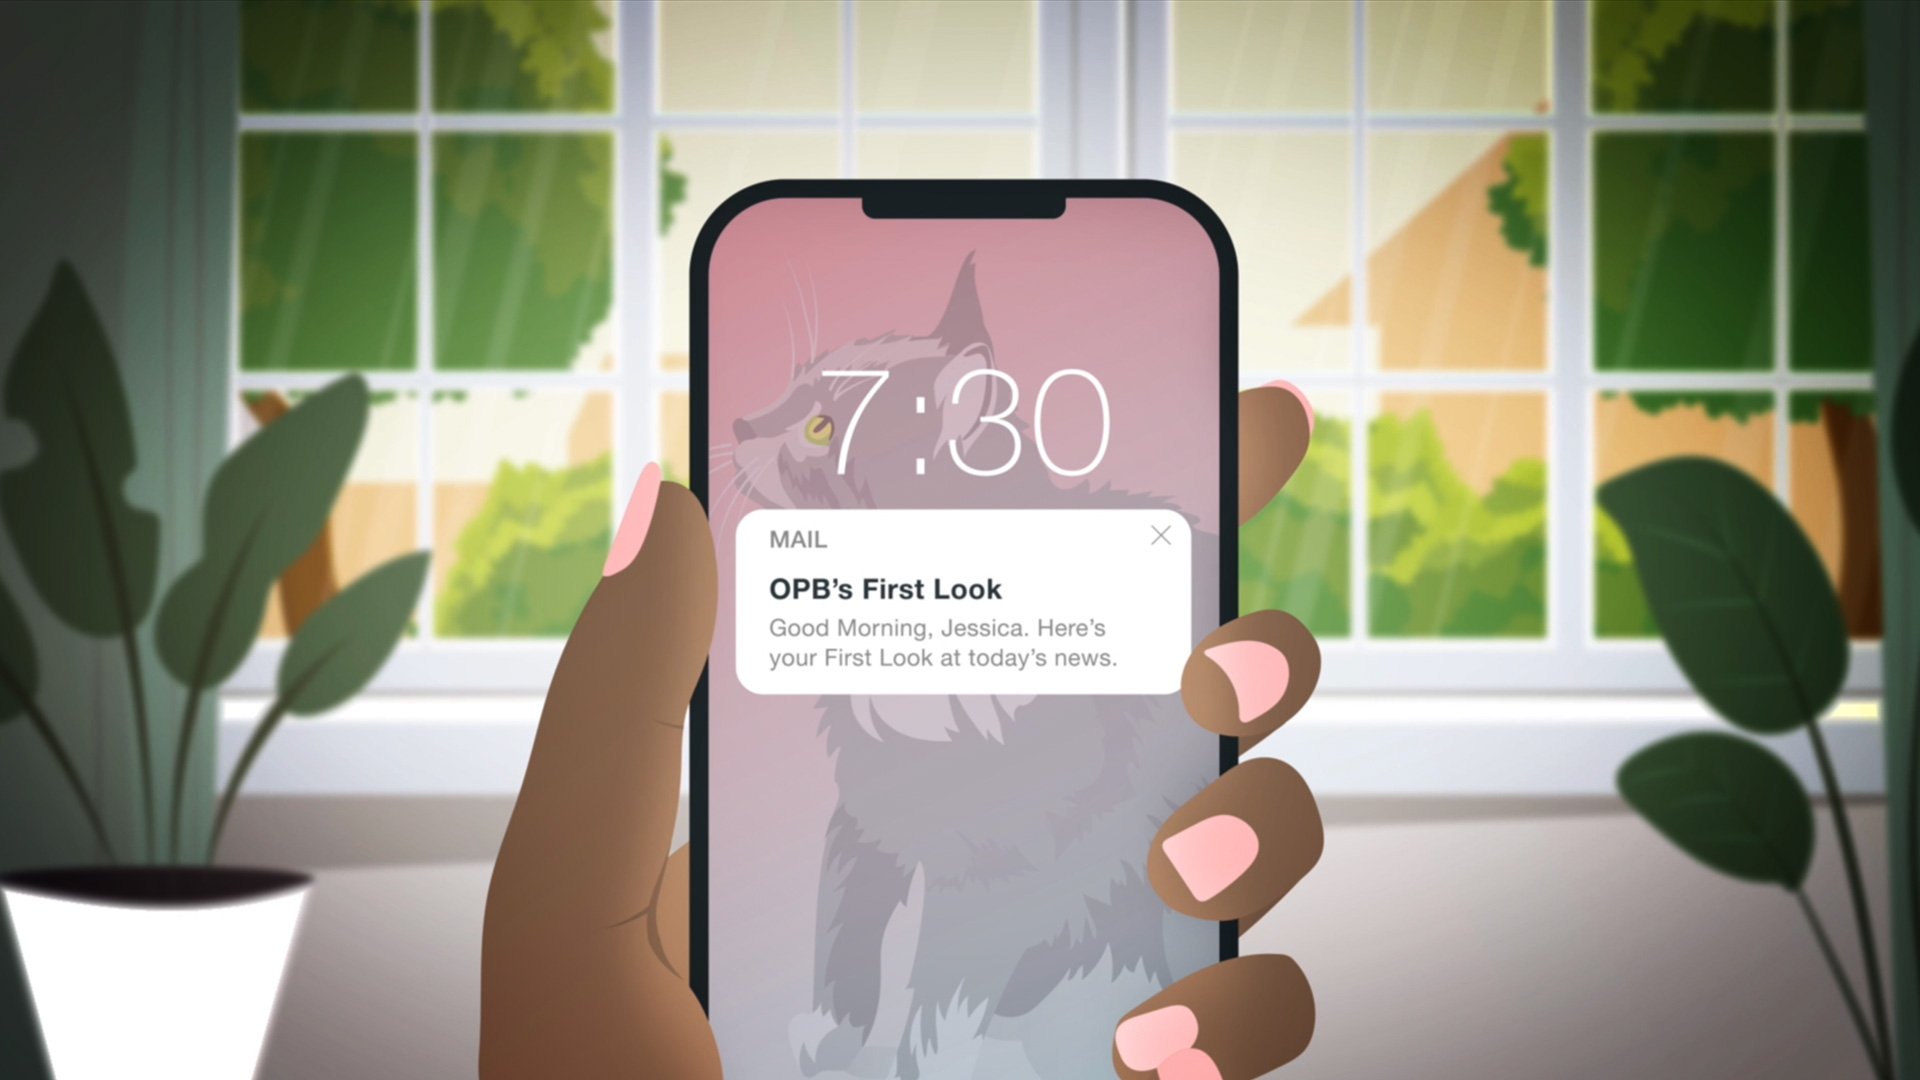 Illustration of alert on mobile device for Oregon Public Broadcasting's First Look